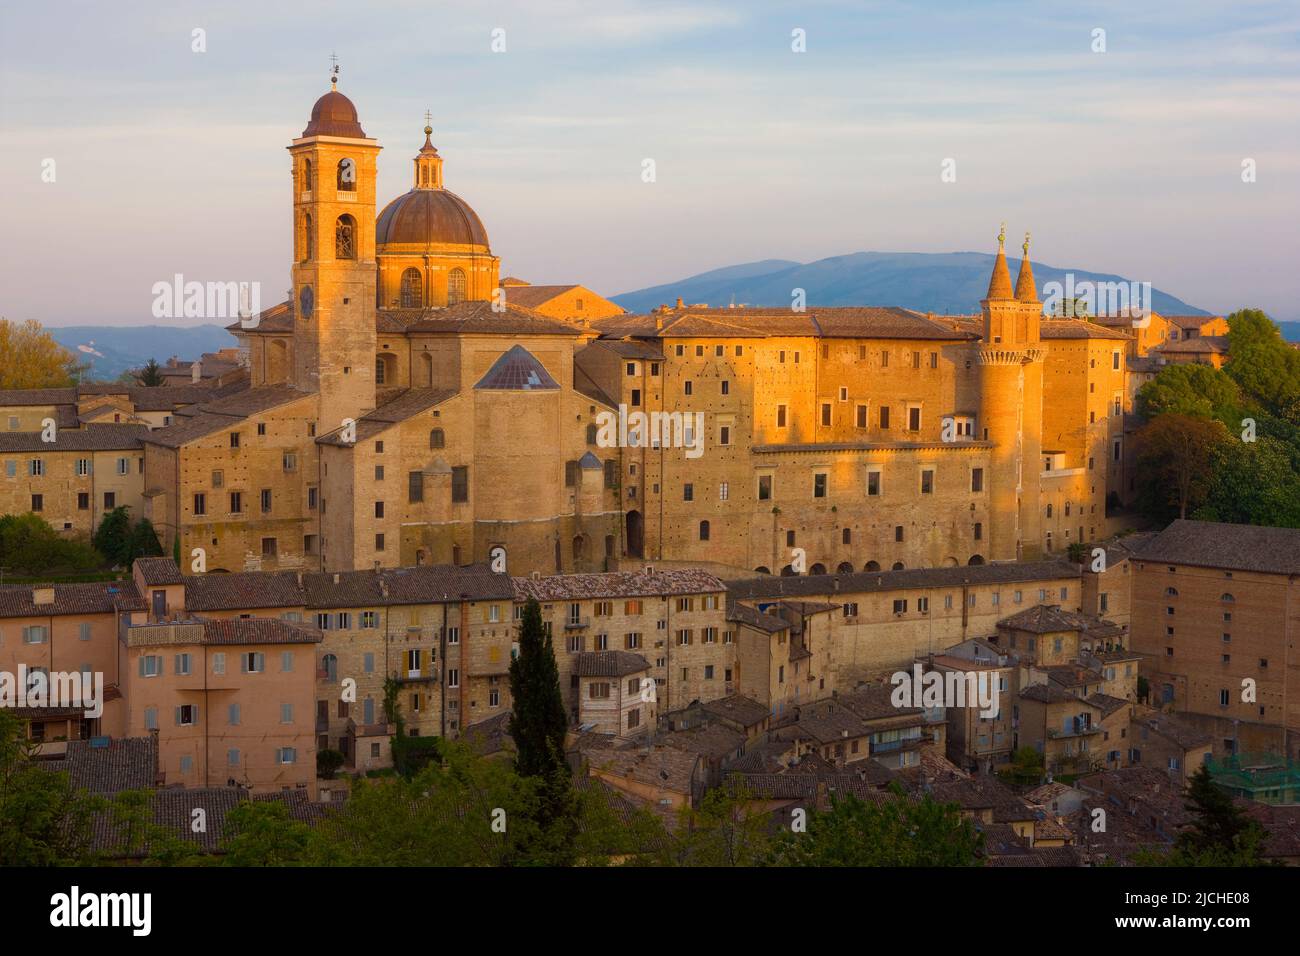 View of the Ducal Palace, Urbino, Marche, Italy Stock Photo